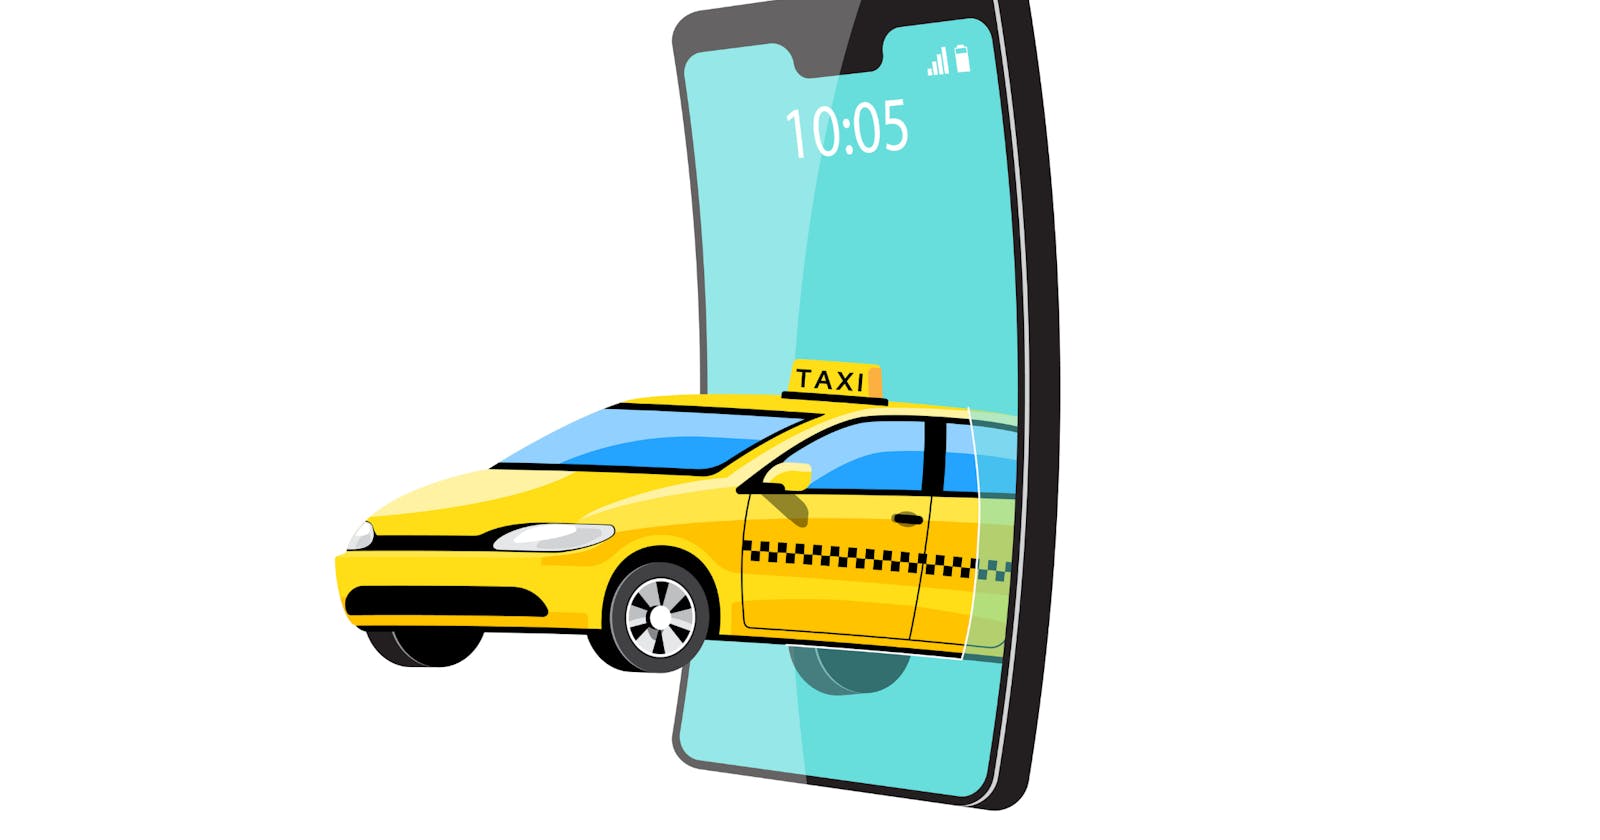 5 Uber alternatives to consider while create your own taxi app